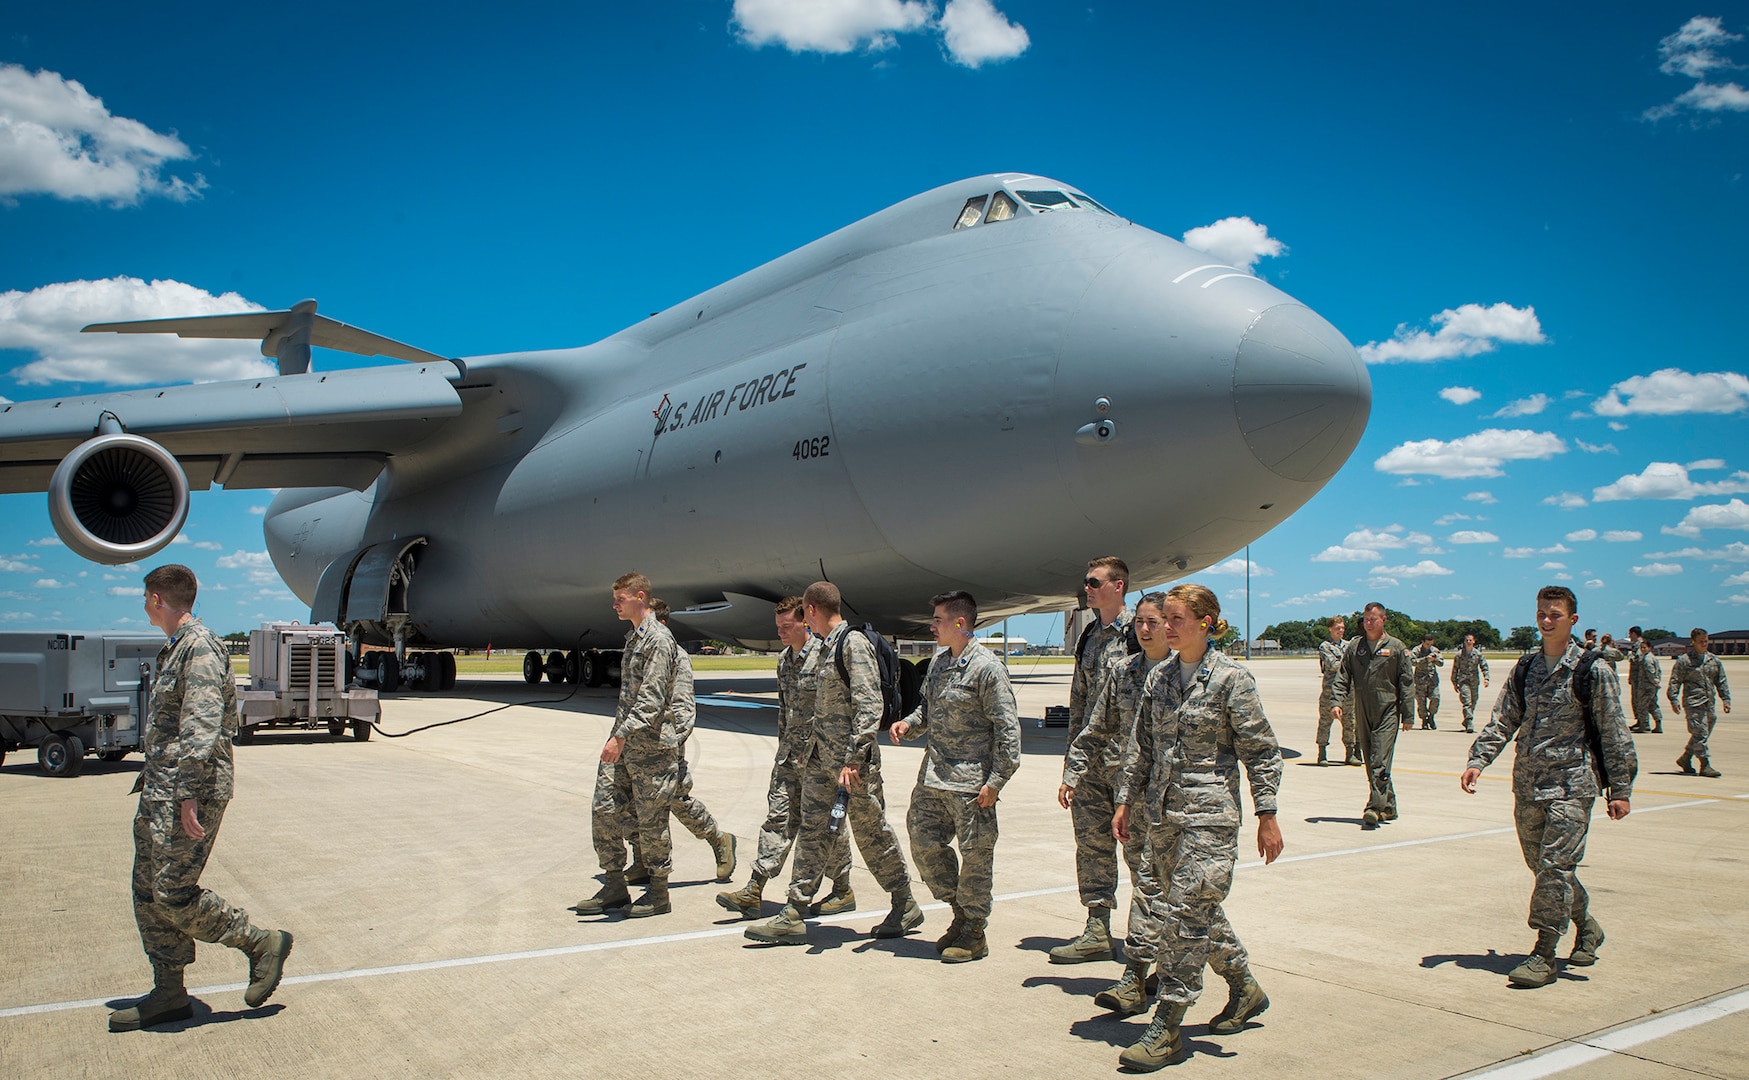 Reserve Officer Training Corps cadets tour a C-5M Super Galaxy aircraft at the 433rd Airlift Wing July 26, 2017, at Joint Base San Antonio-Lackland, Texas. The cadets also visited the engine shop and flew in the C-5 flight simulator at the 733rd Training Squadron. (U.S. Air Force photo by Benjamin Faske)
